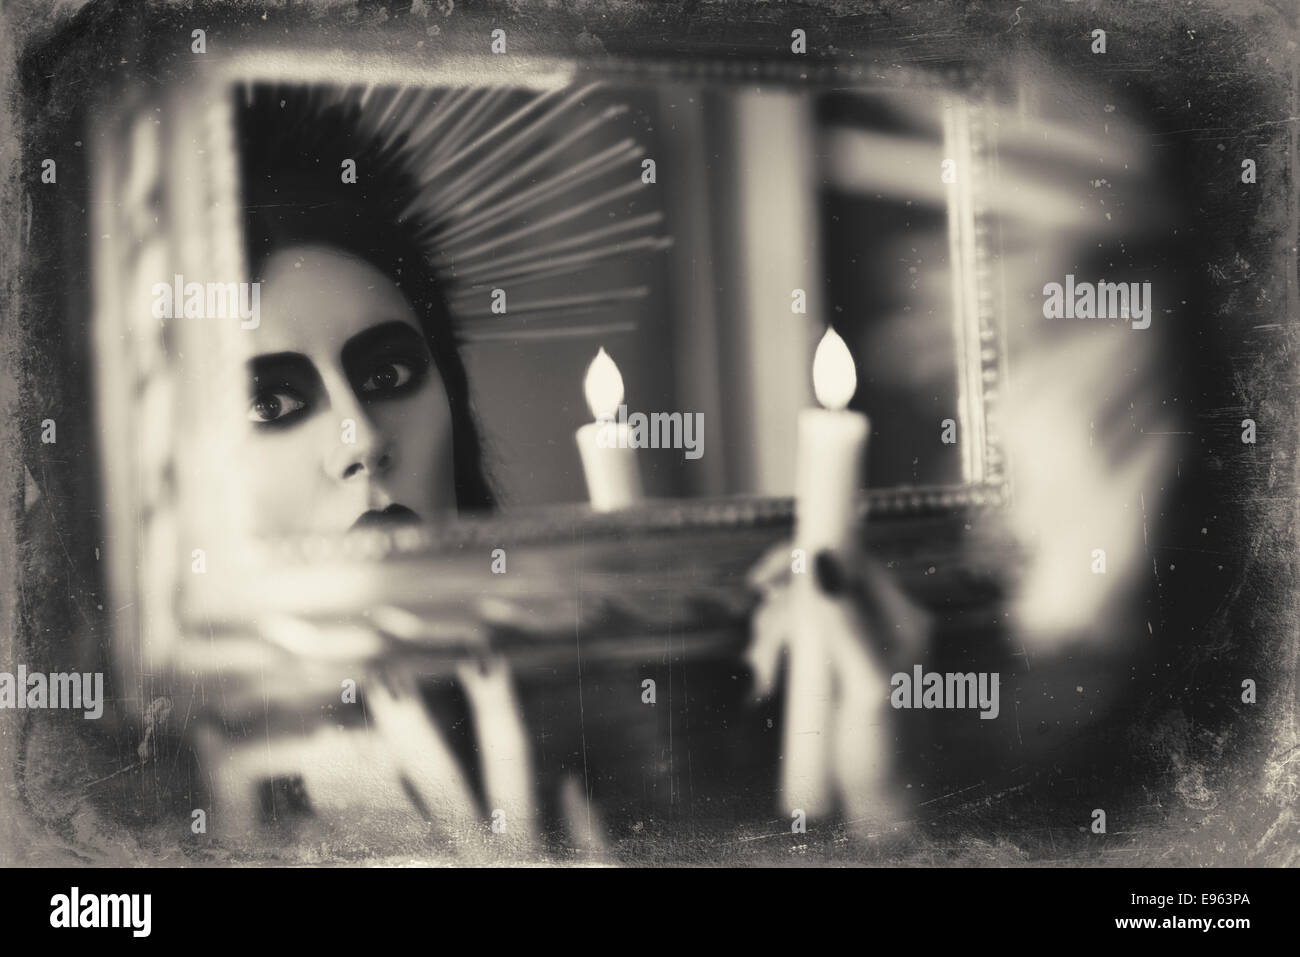 Beautiful goth girl holding candle in hand and looking into the mirror. Grunge texture effect Stock Photo